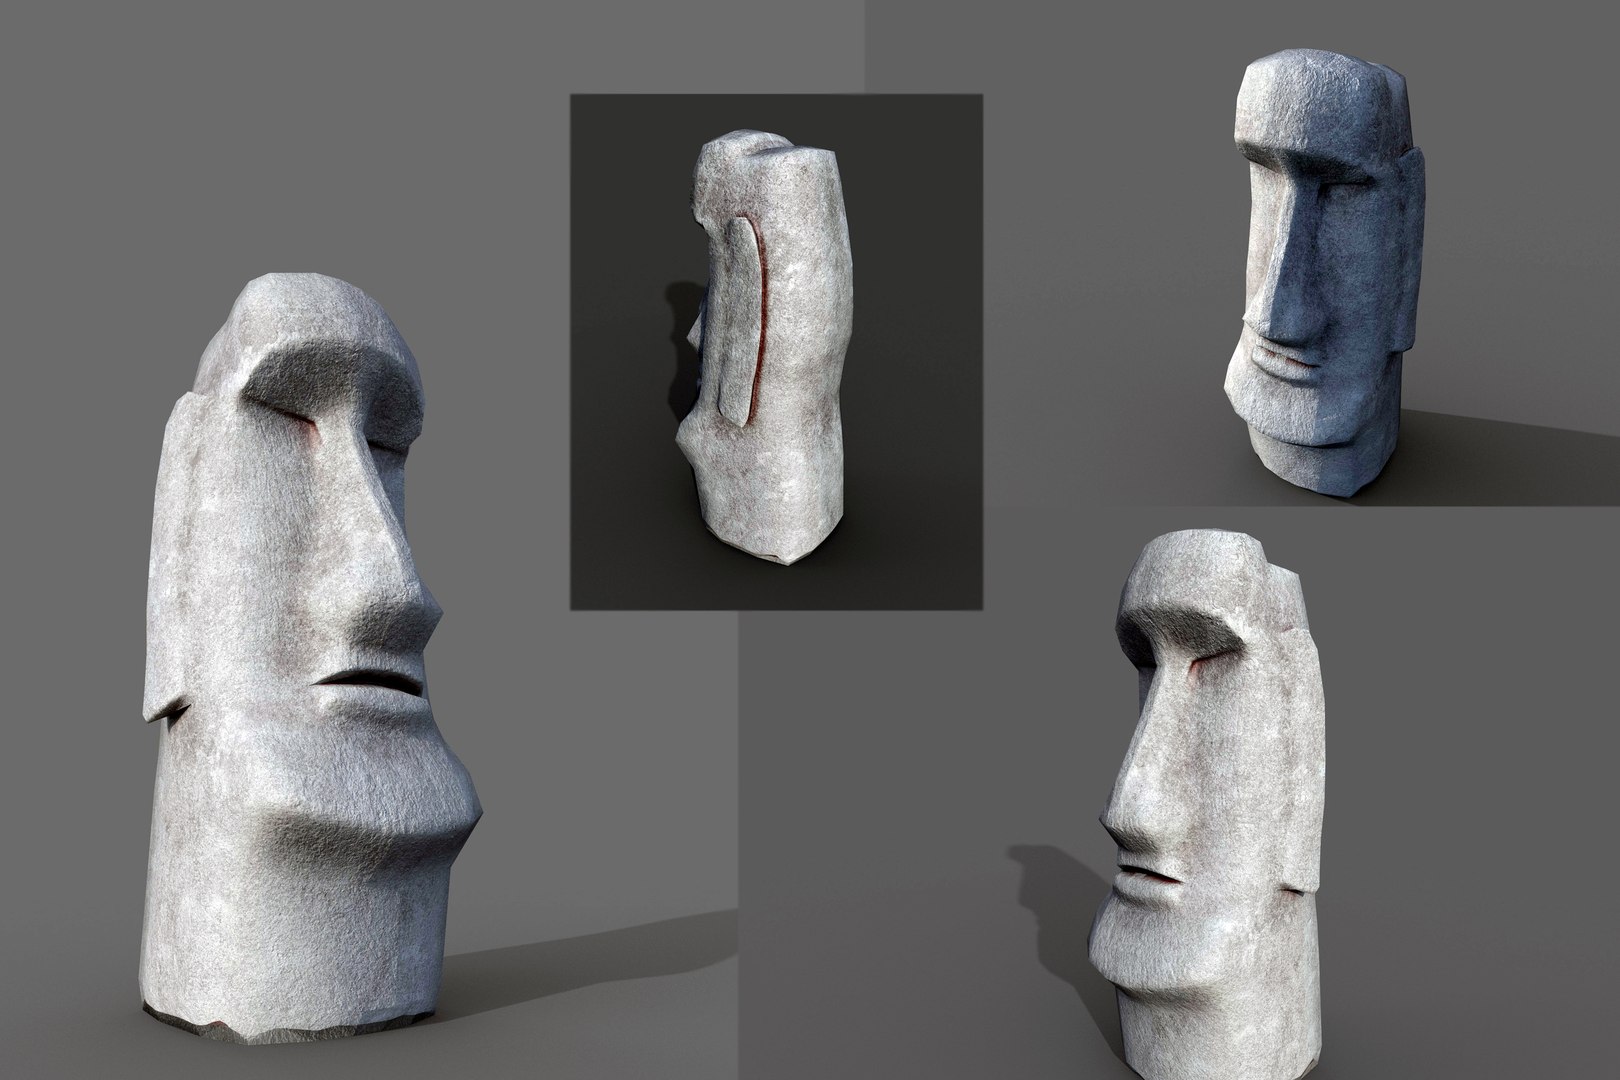 Moai 🗿 or stone statue emoji, 3D model and more in Word, Excel